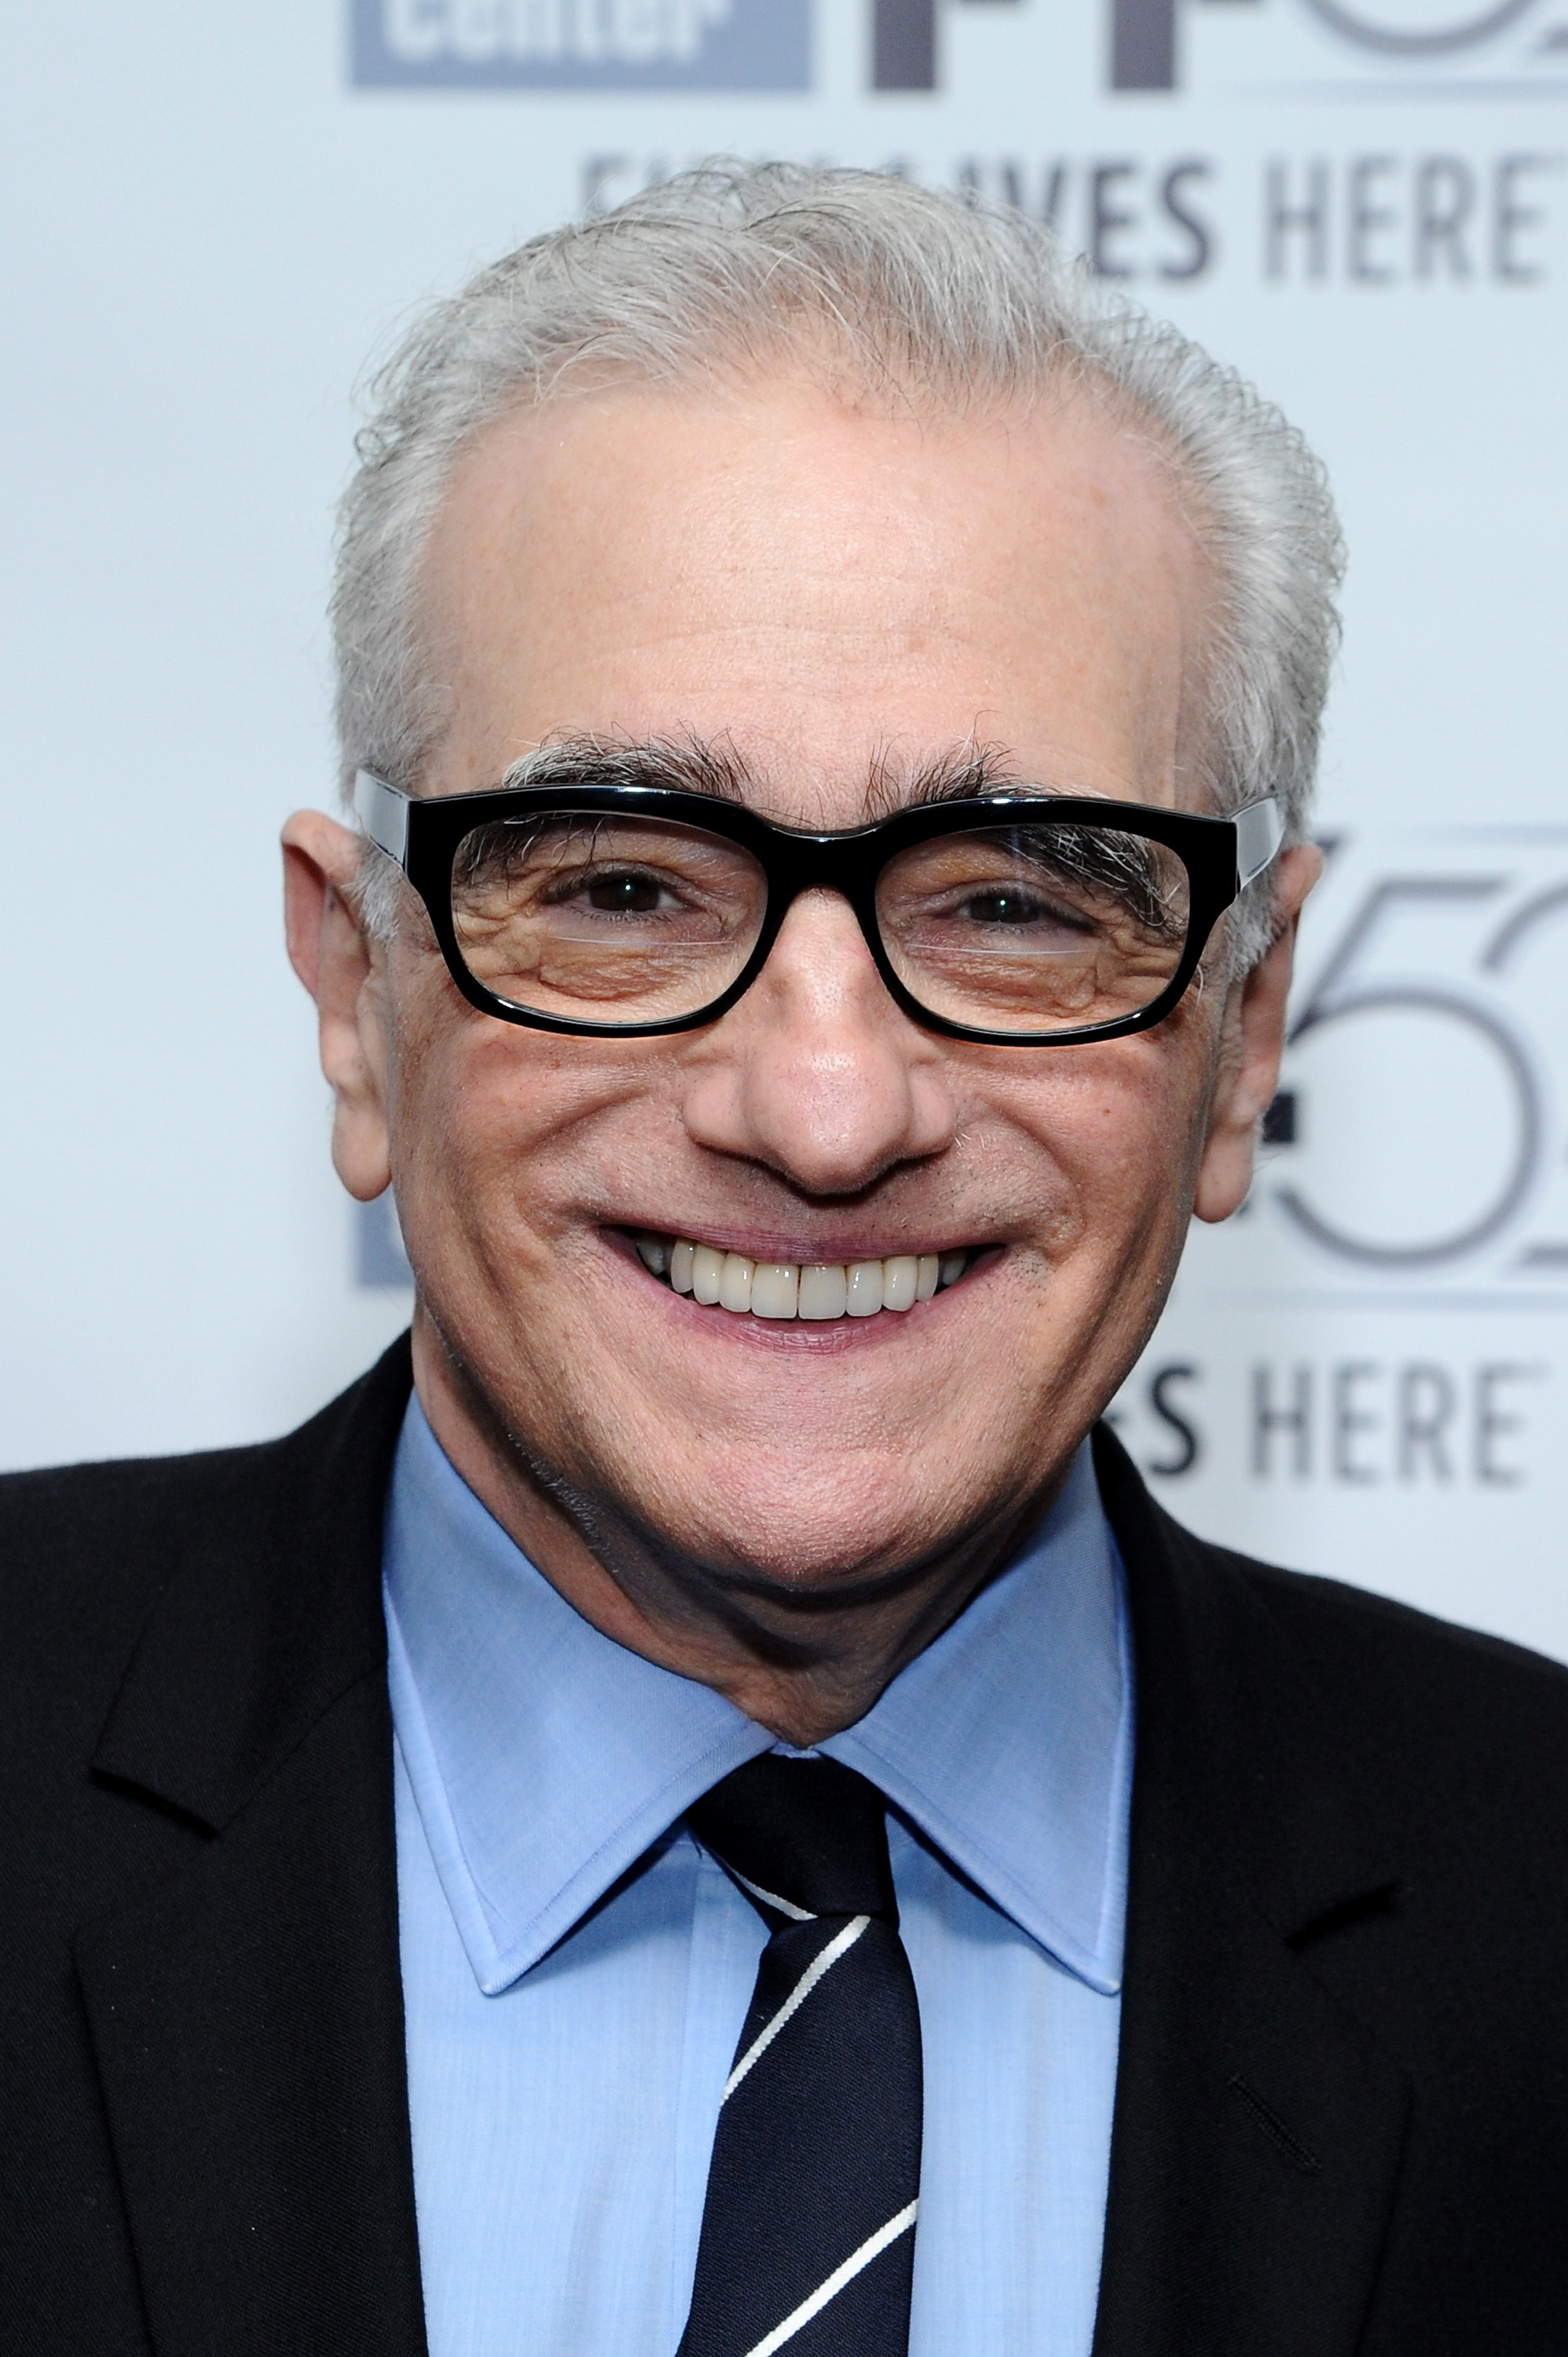 Director Martin Scorsese attends the "The 50 Year Argument" premiere during the 52nd New York Film Festival at Walter Reade Theater on September 28, 2014 in New York City. (Ilya S. Savenok—Getty Images)